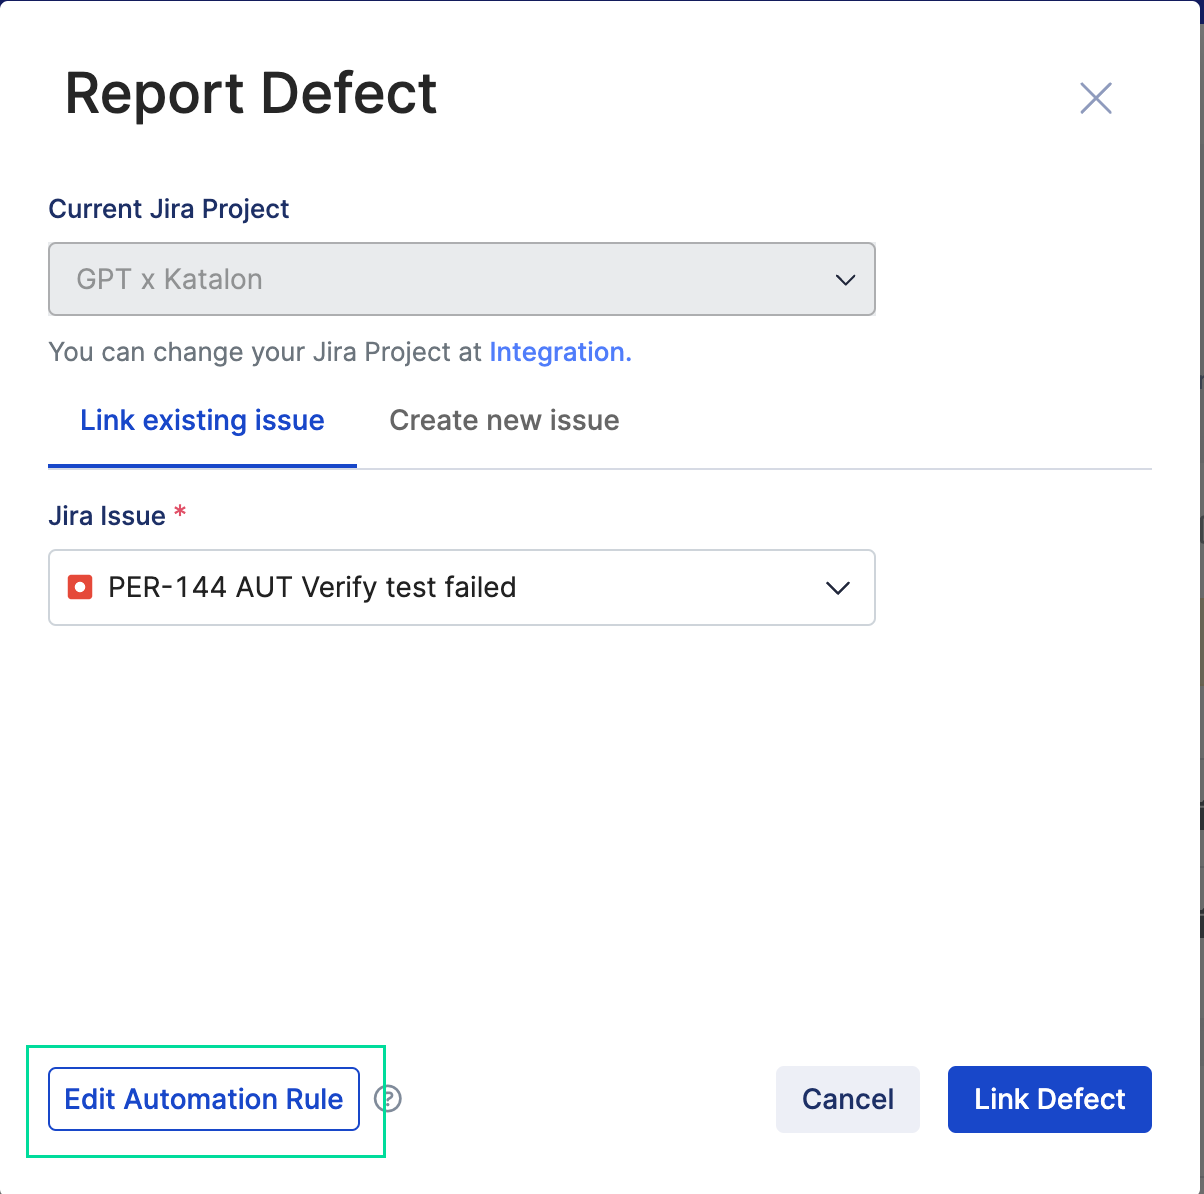 The Edit Automation Rule button in Report Defect.